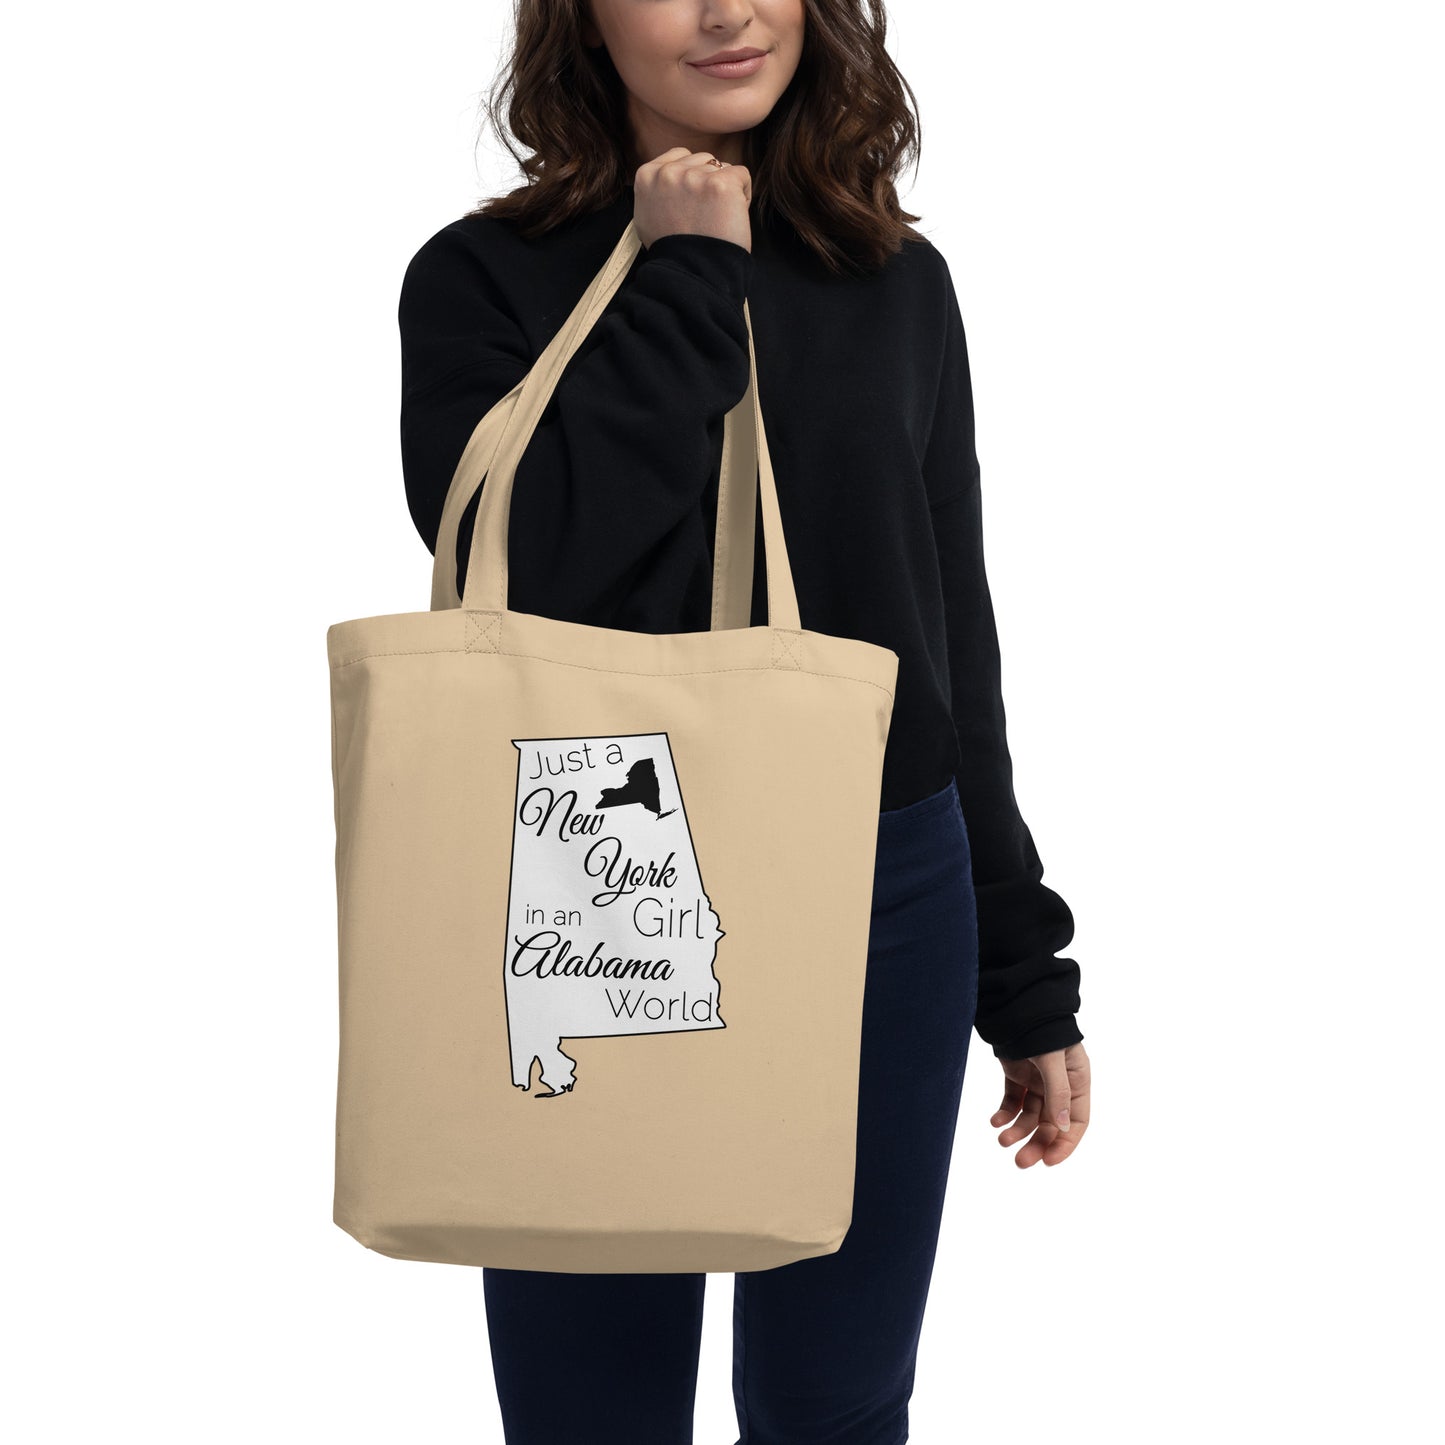 Just a New York Girl in an Alabama World Eco Tote Bag